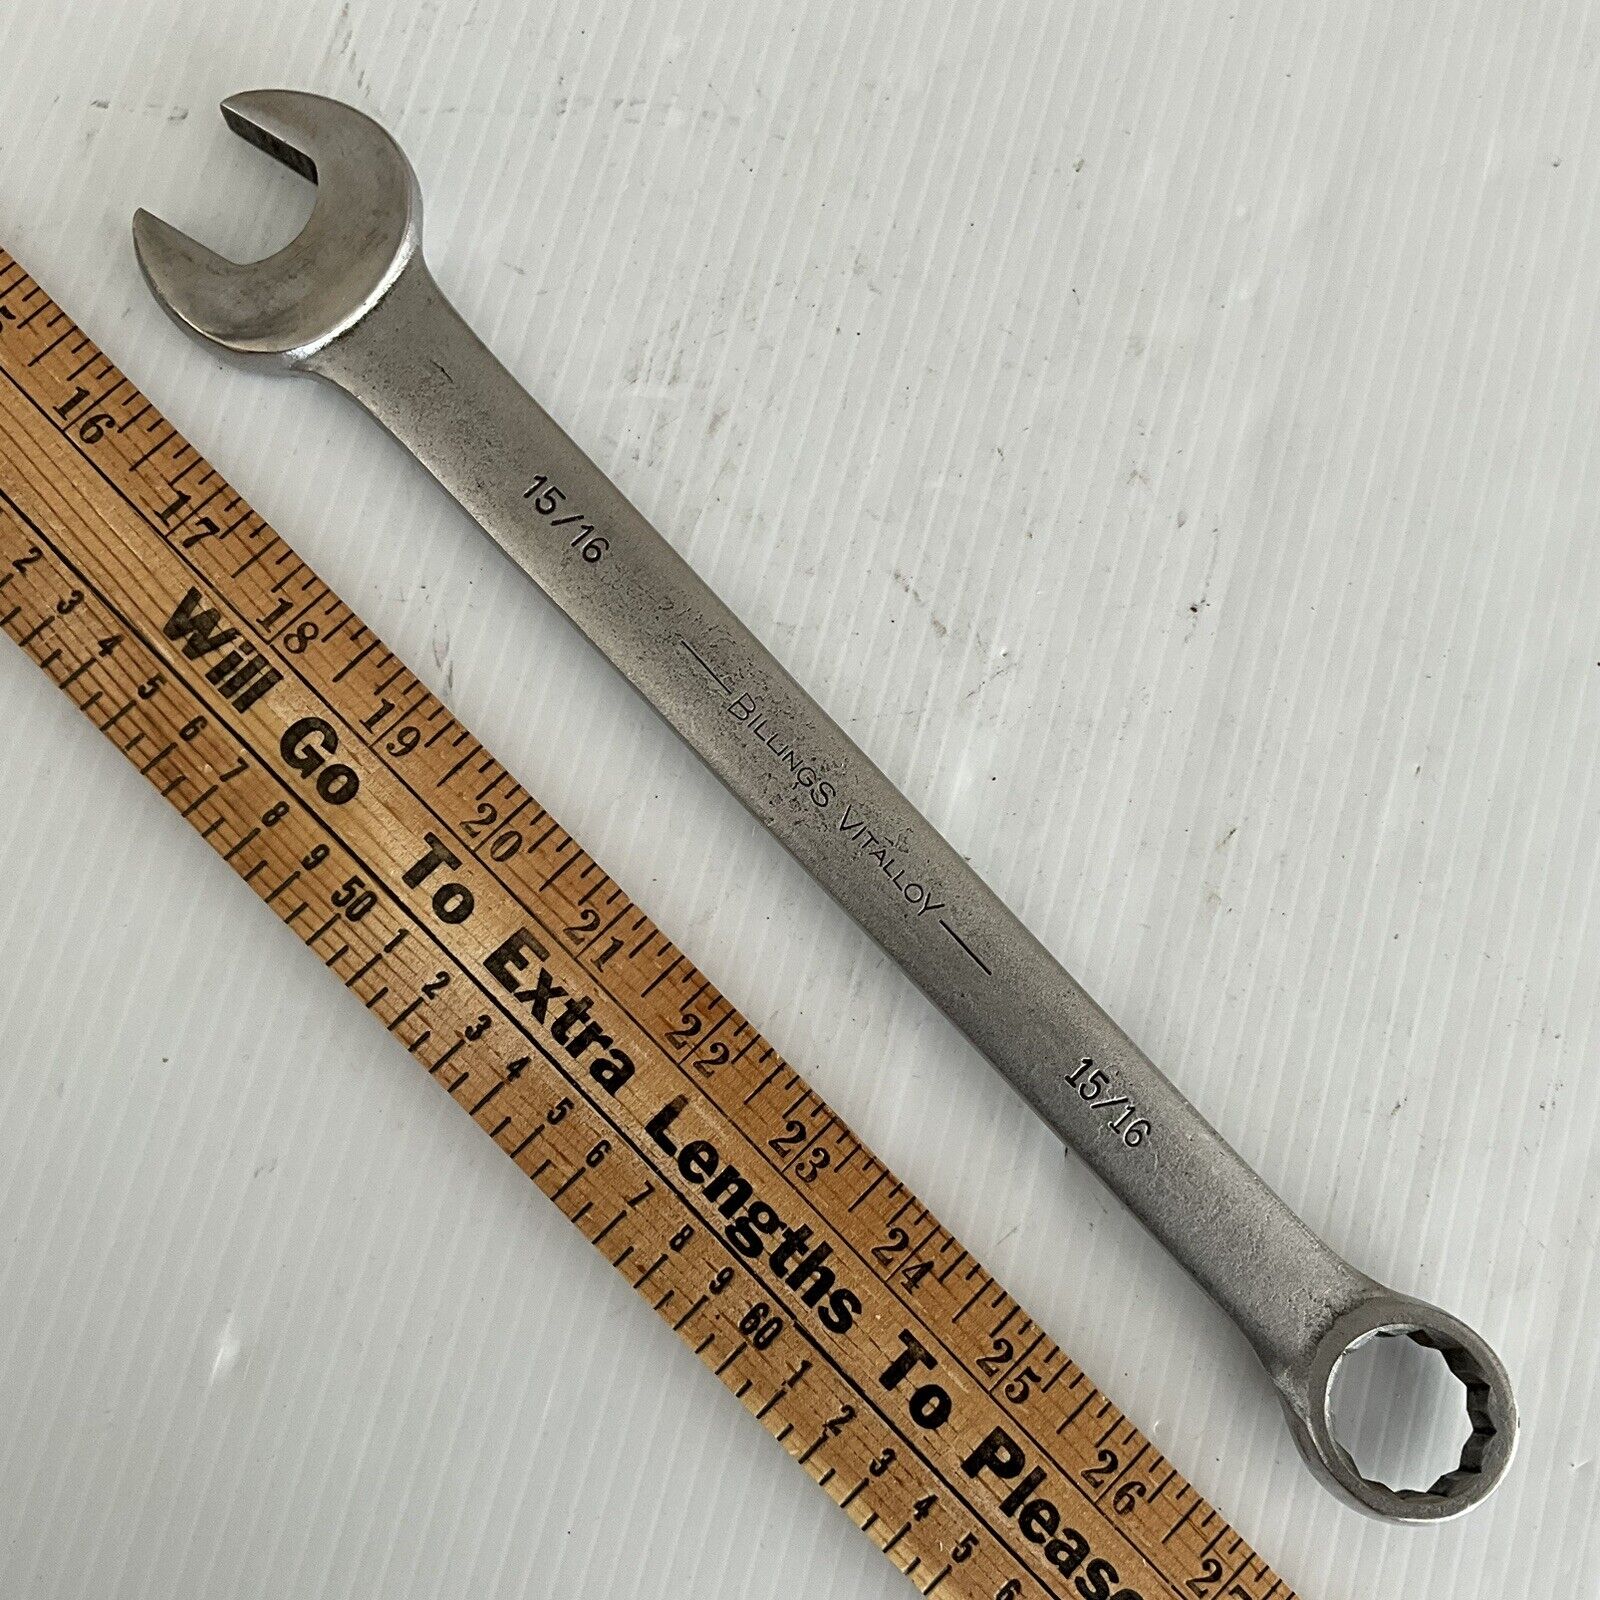 Billings Vitalloy 1168 15/16” 12 Point Combination Wrench Vintage Made in USA